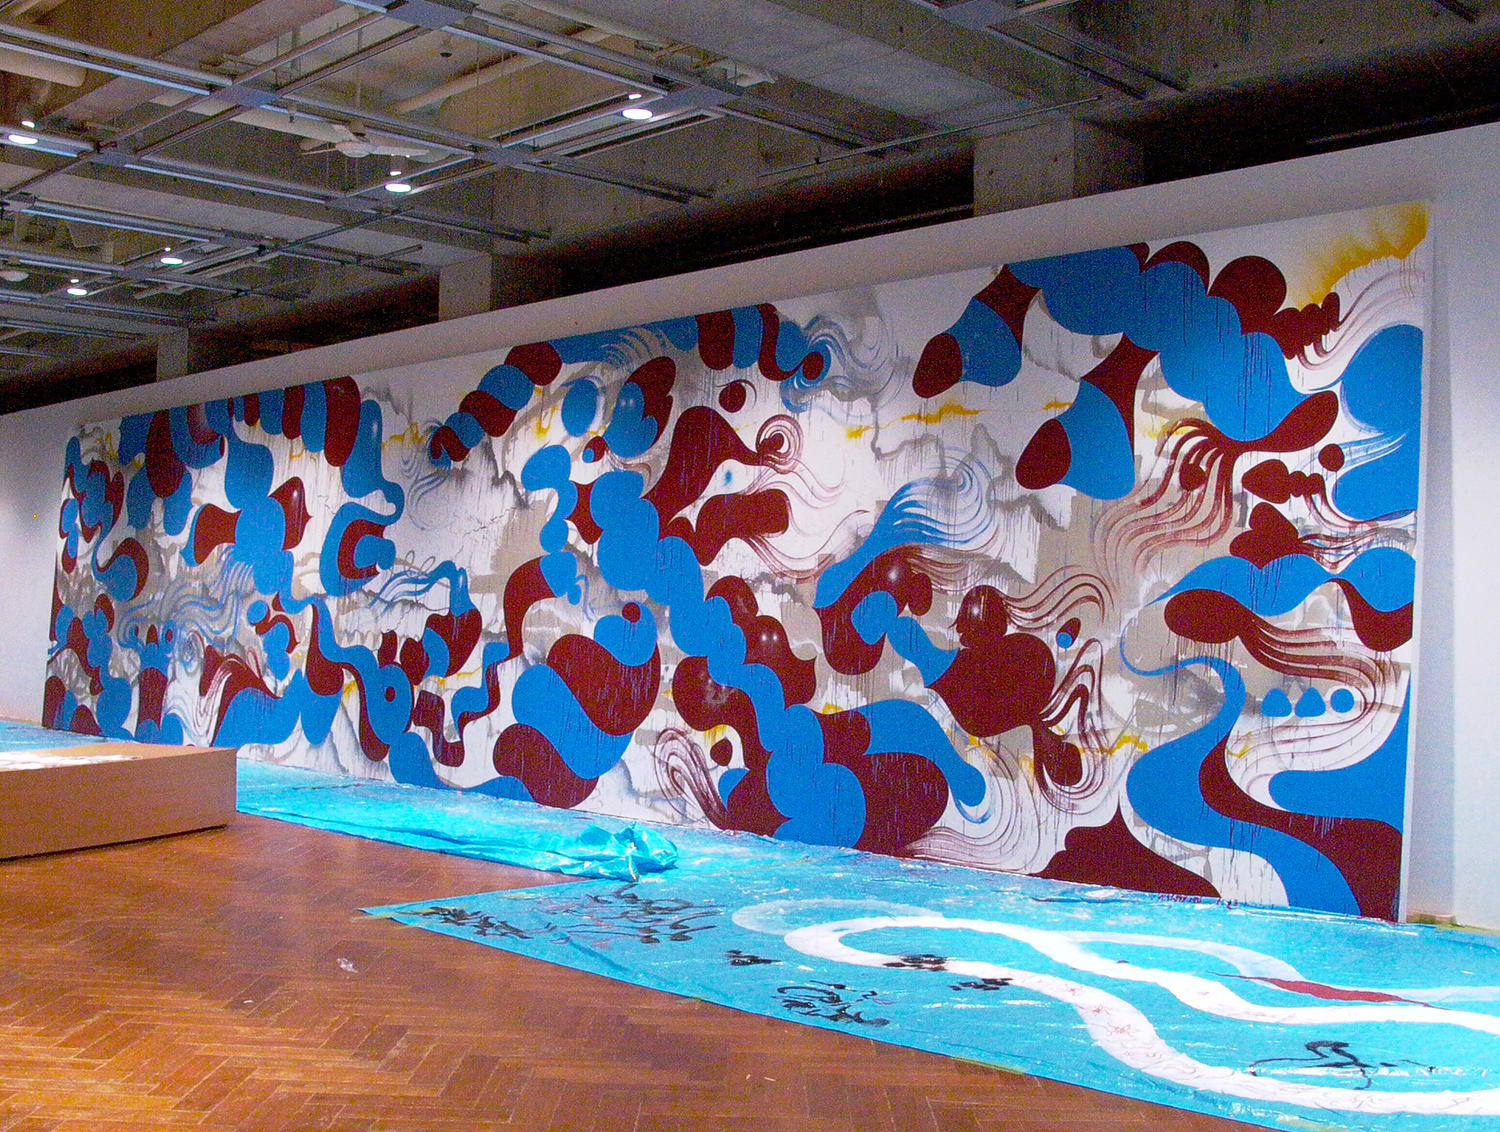   installation view, Butterfly In The Hurricane  commissioned by  World Company  Roppongi, Japan, 2003   